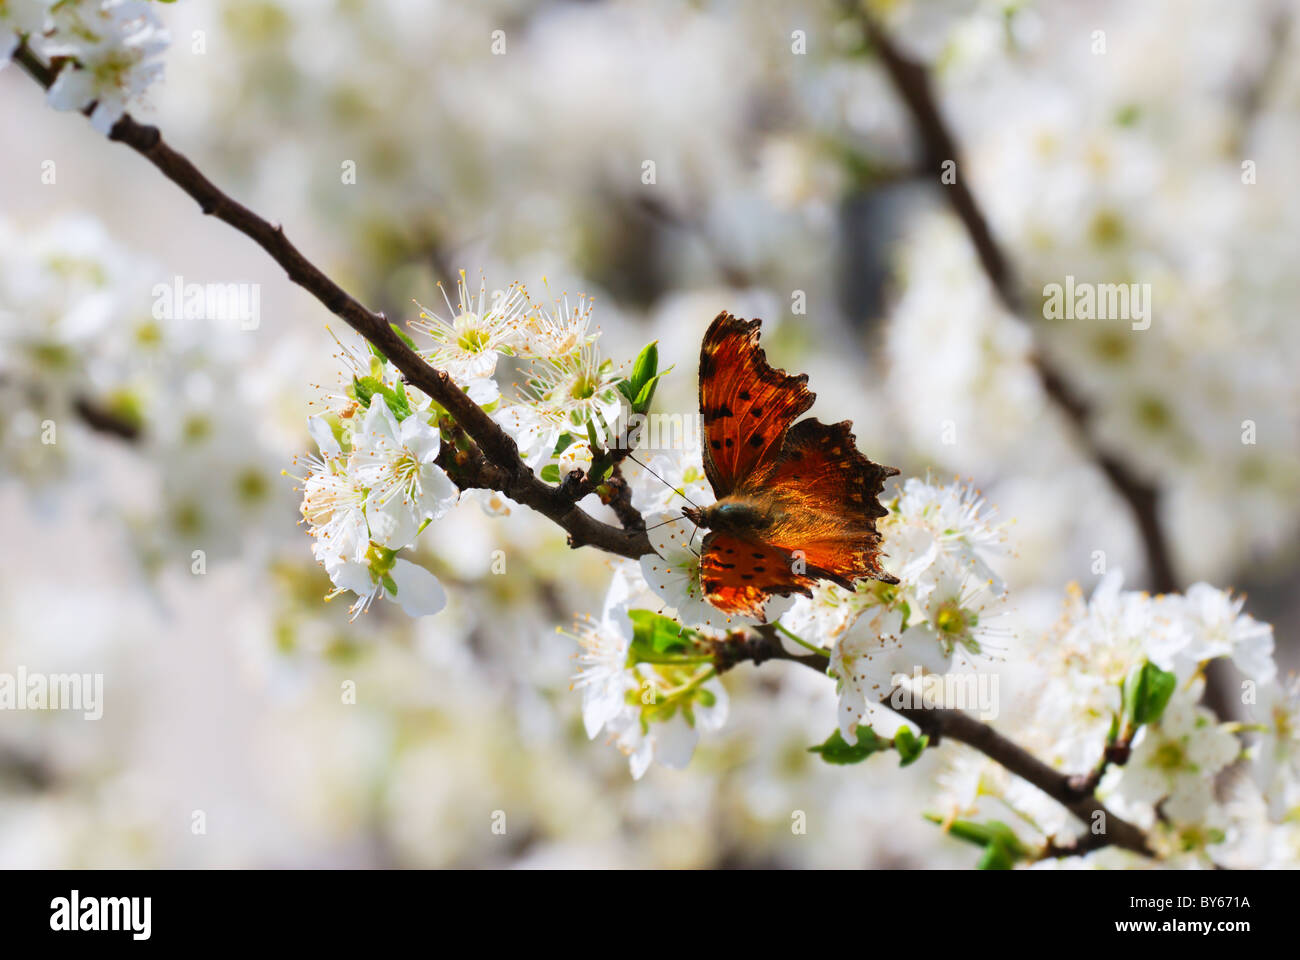 Small tortoiseshell (Nymphalis sp) butterfly on white springtime blossom Stock Photo